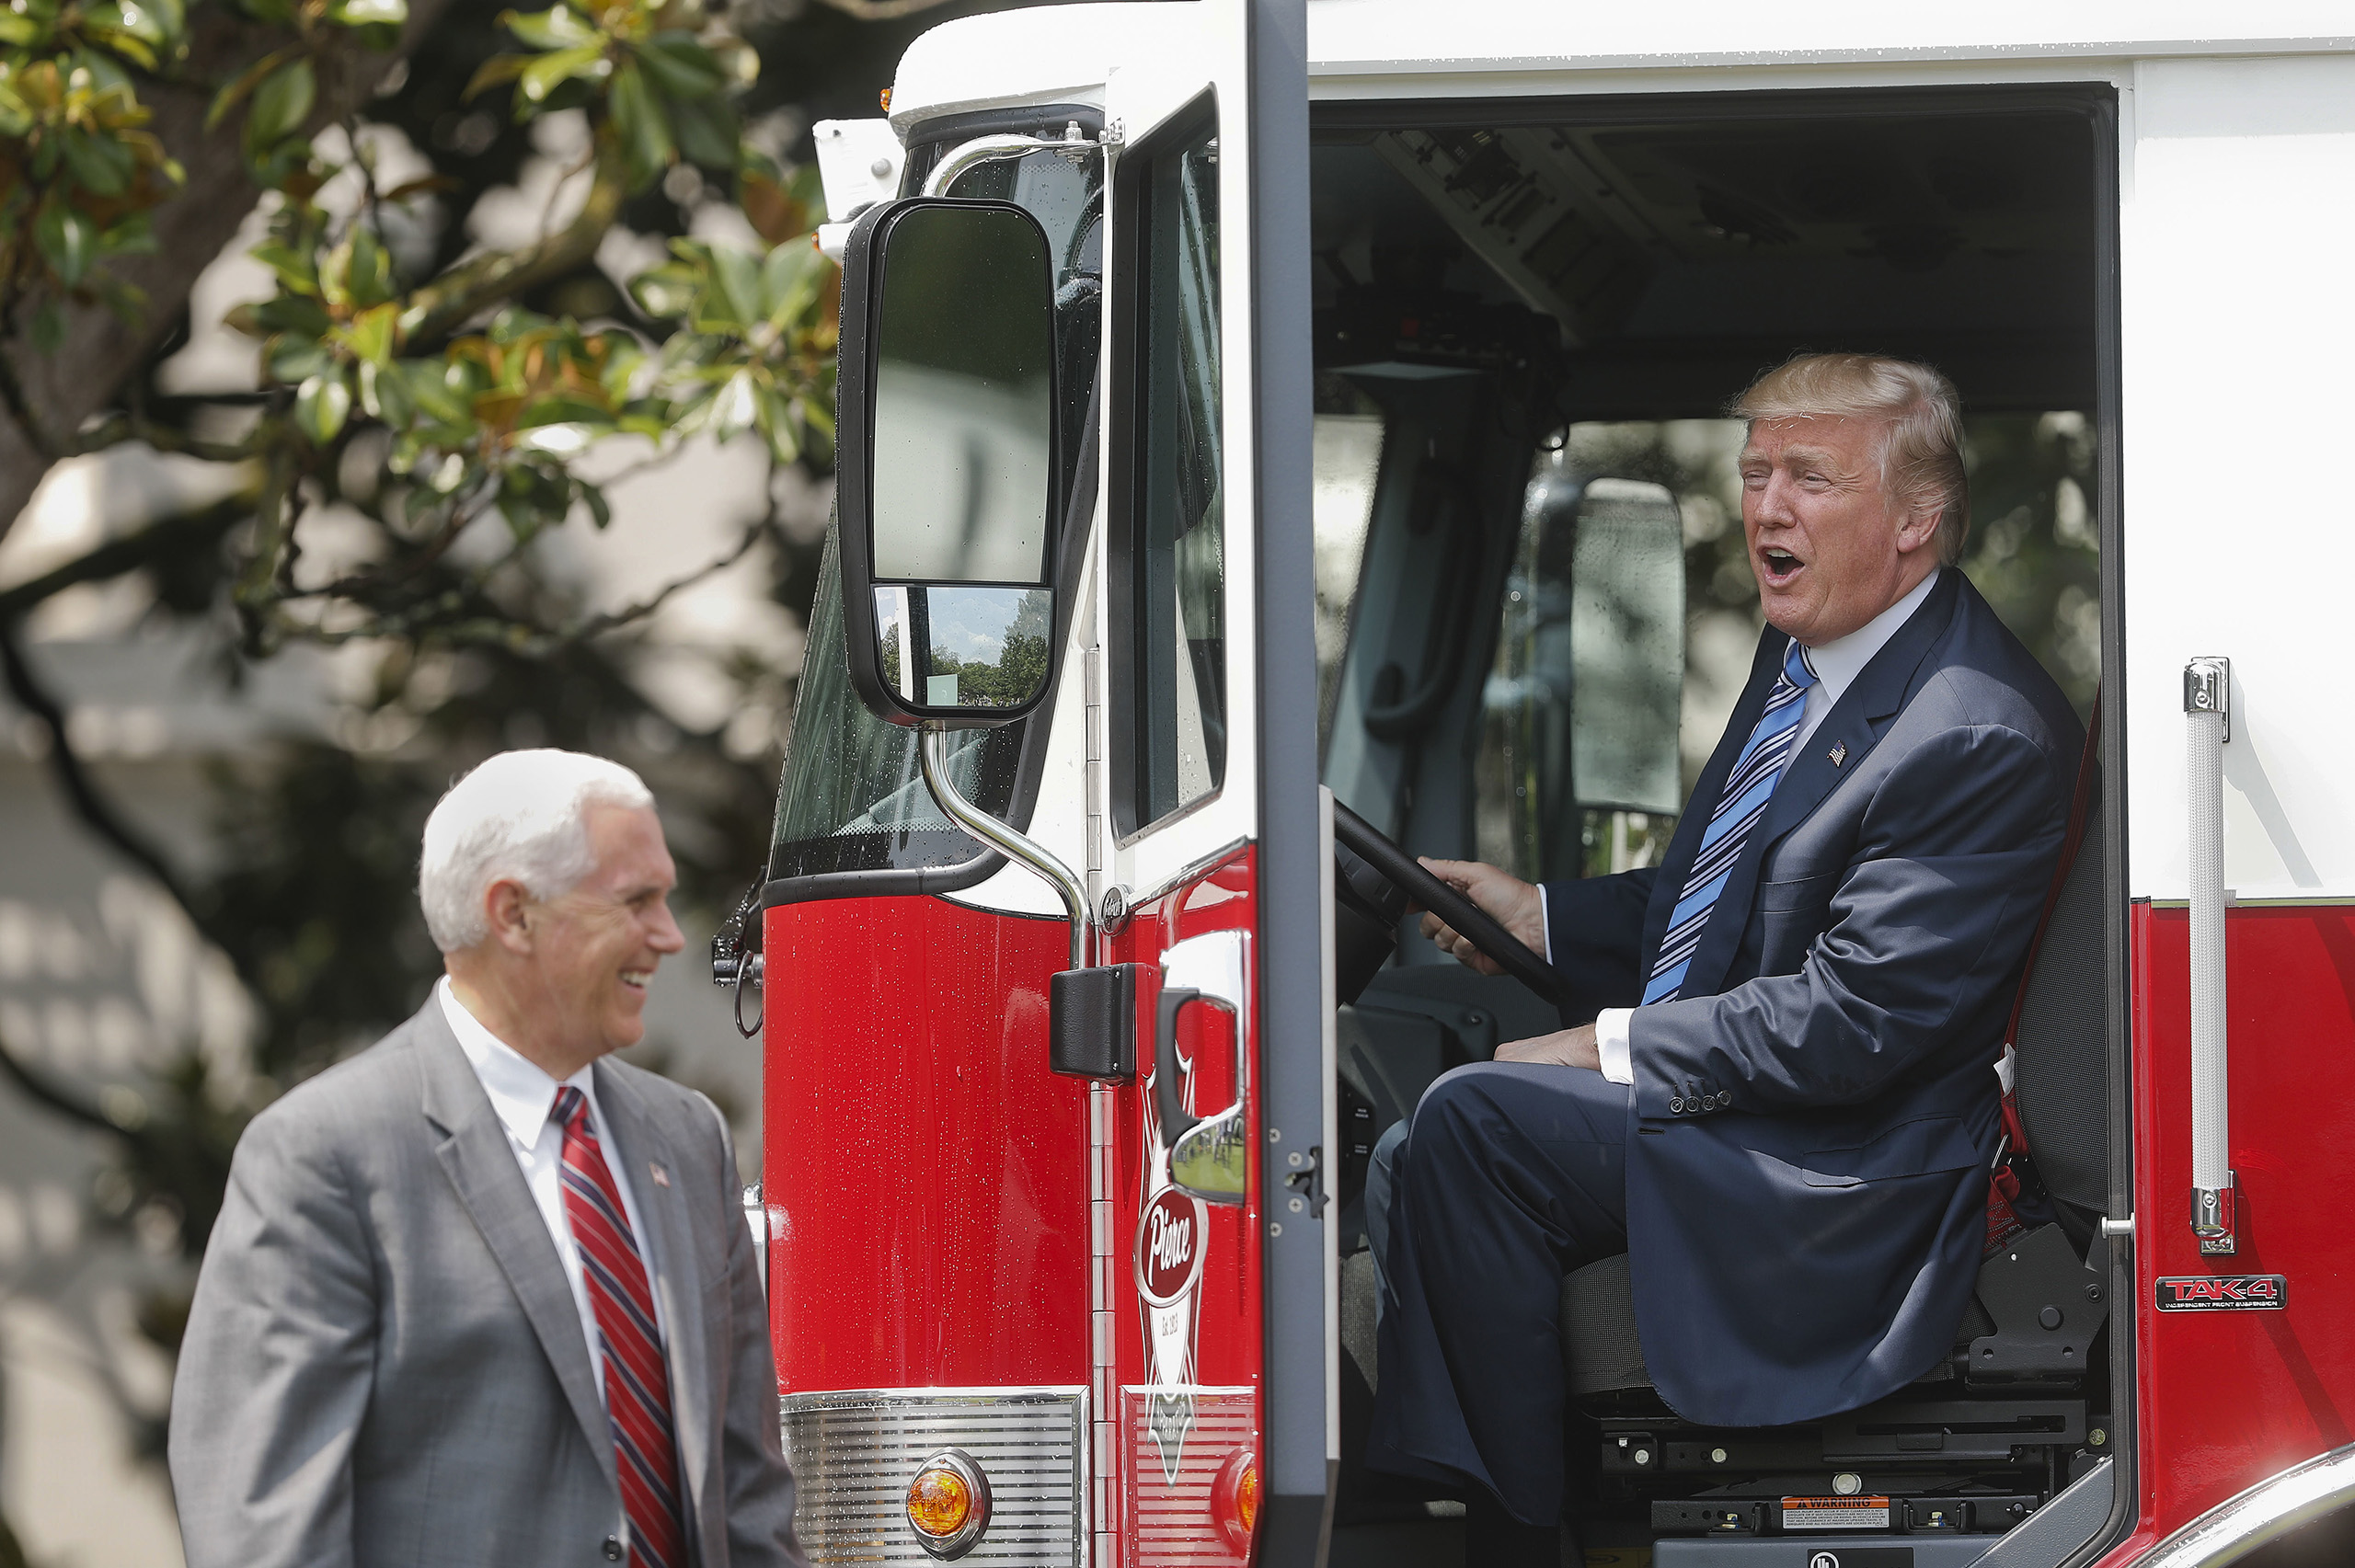 President Donald Trump, accompanied by Vice President Mike Pence, sits inside a cabin of a firetruck during a  Made in America,  product showcase featuring items created in each of the U.S. 50 states, Monday, July 17, 2017, on the South Lawn of the White House in Washington.